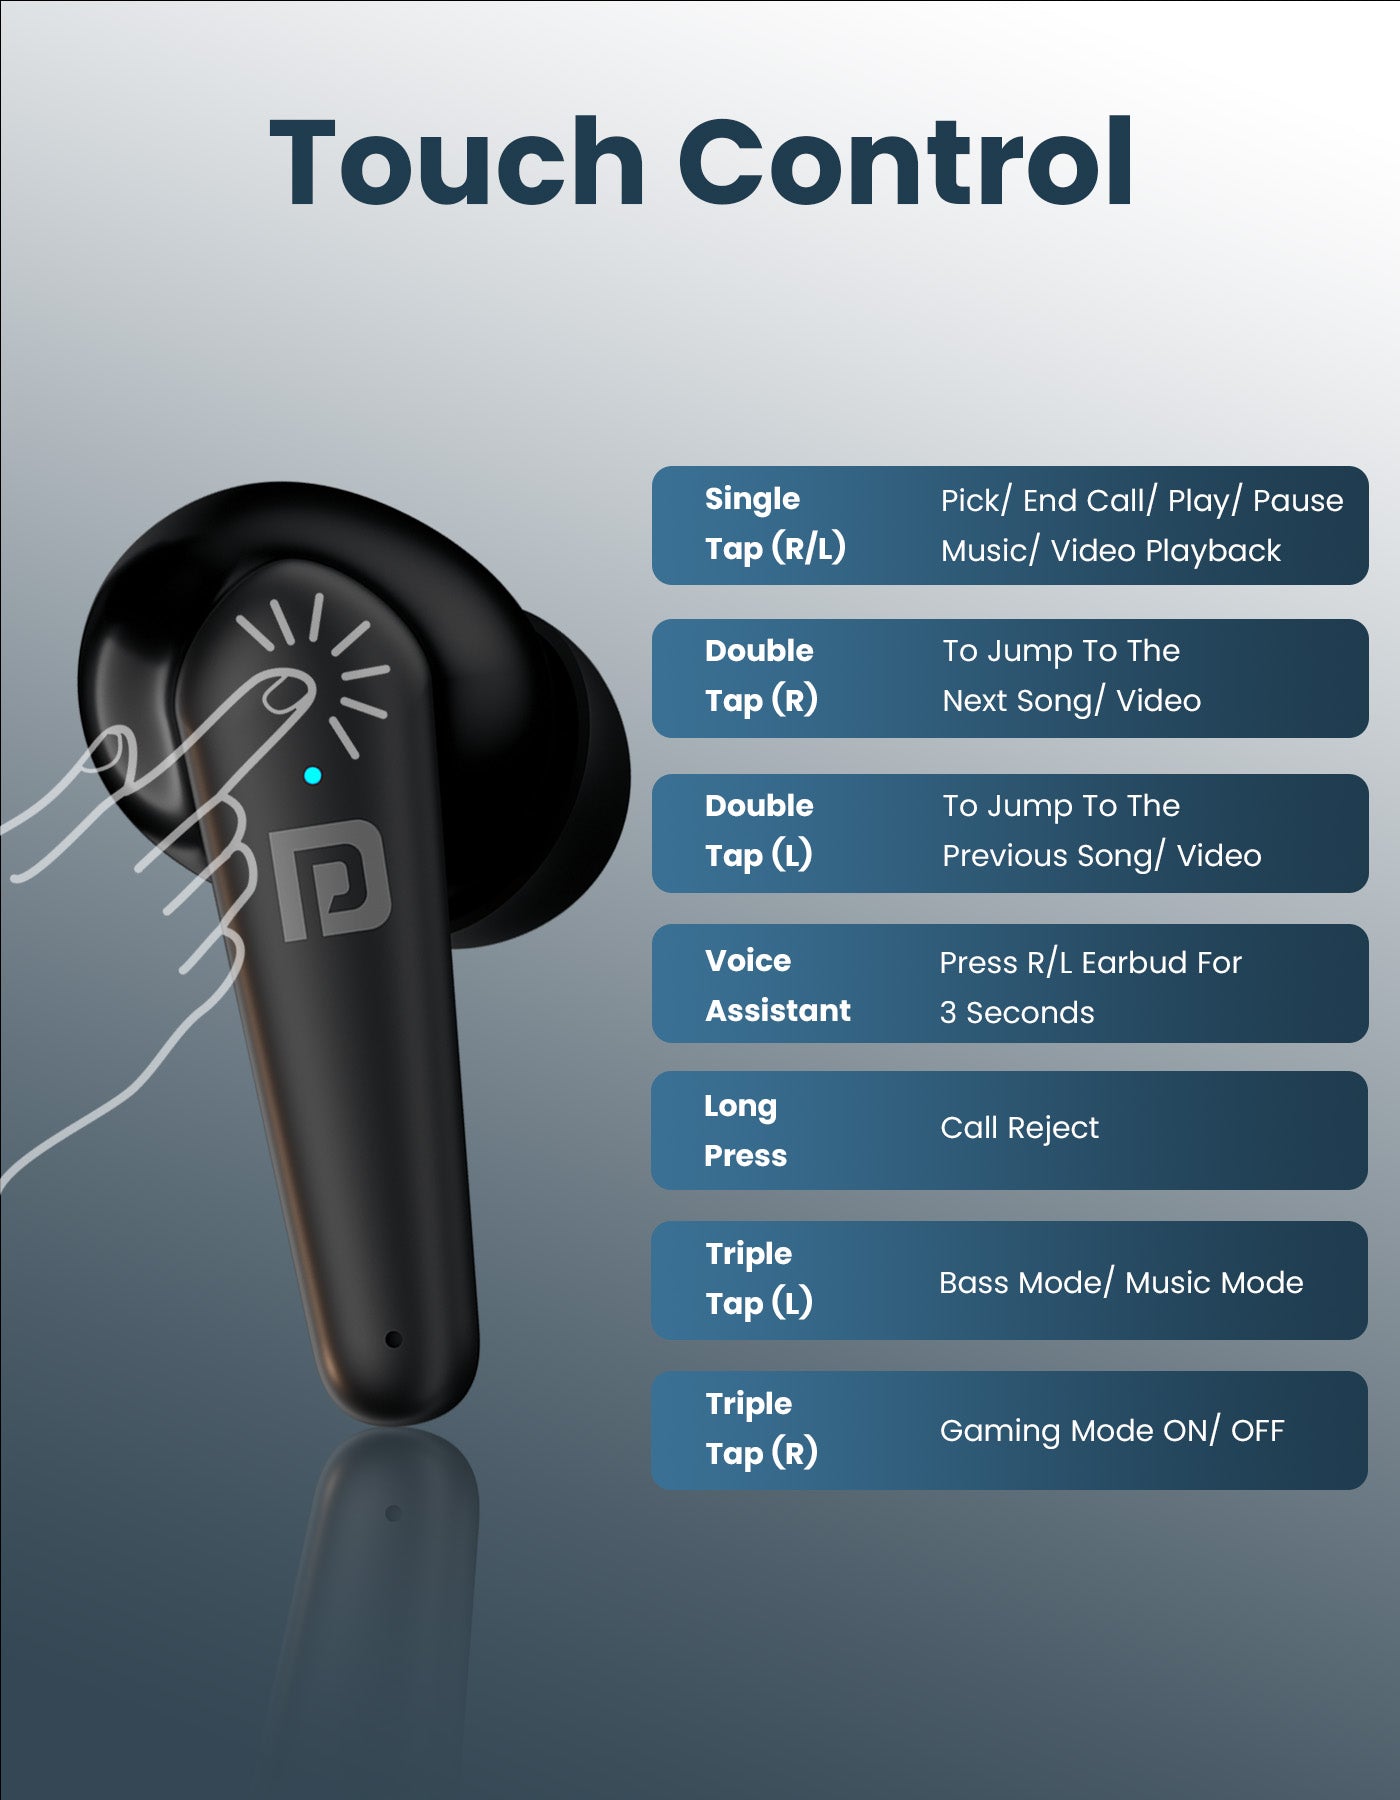 Portronics Harmonics Twins s10 Best earbuds with mini case| Bluetooth earbuds with soft touch buttons | |wireless earbuds| best earbuds under 2000